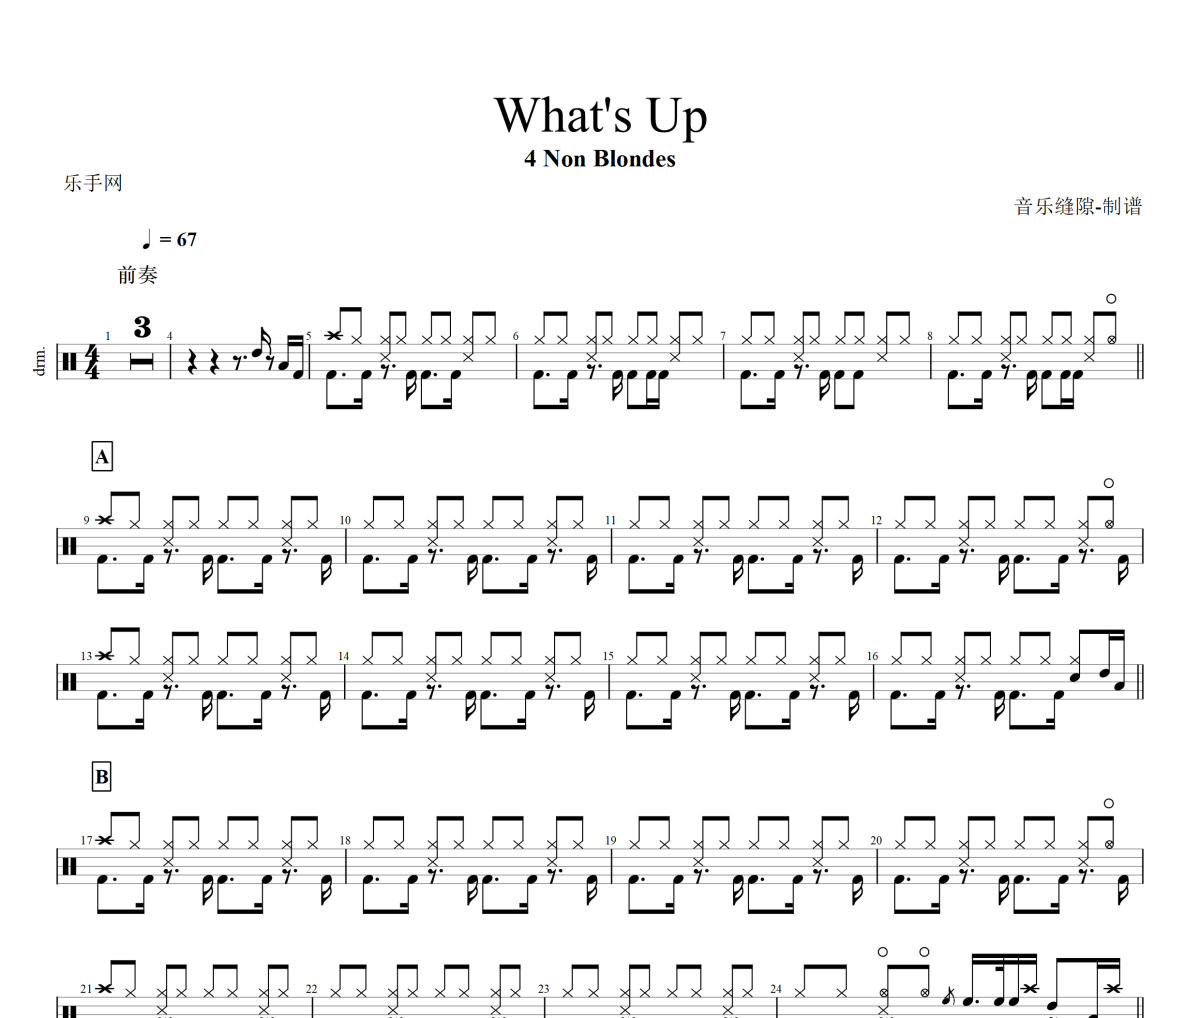 What's Up鼓谱 4 Non Blondes《What's Up》架子鼓|爵士鼓|鼓谱+动态视频